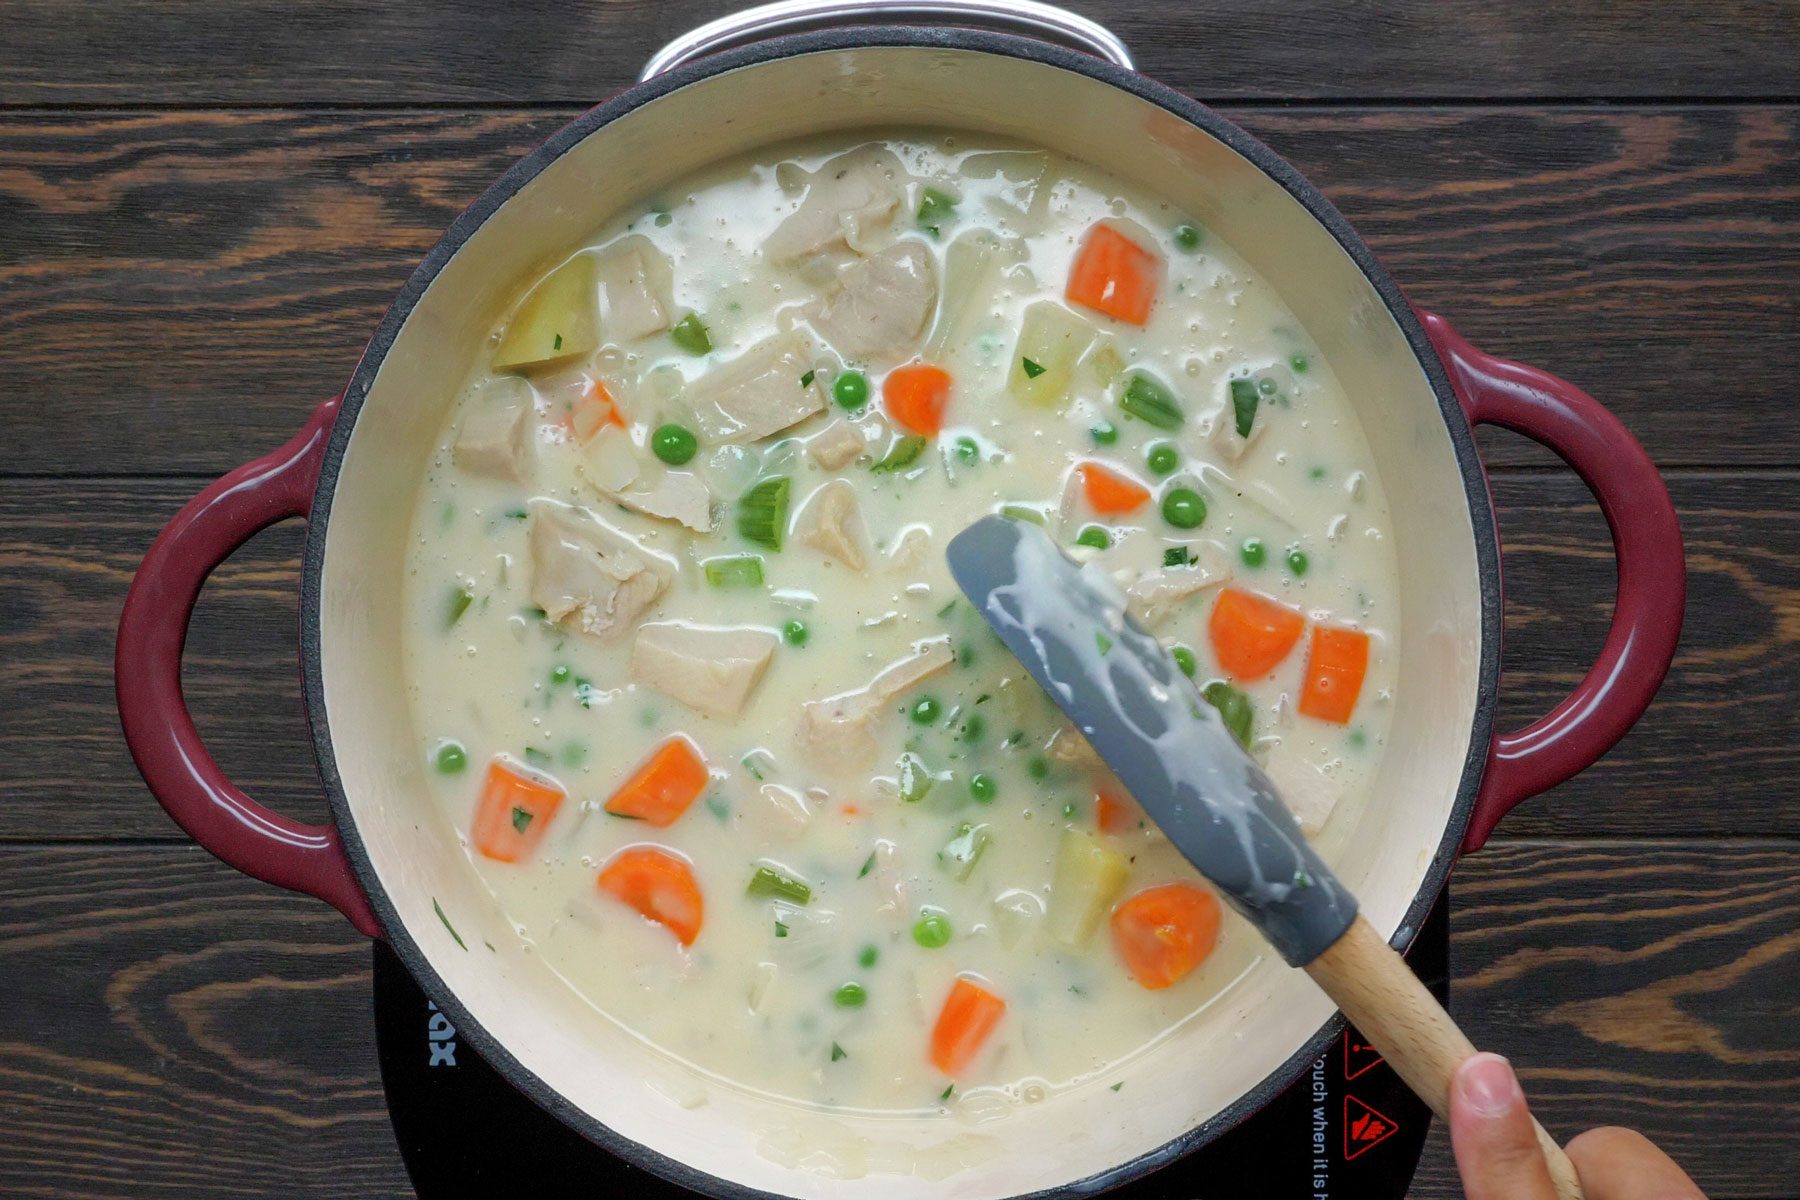 Turkey cubes, frozen peas, cream is added in a pot with vegetables to make Turkey Potpies